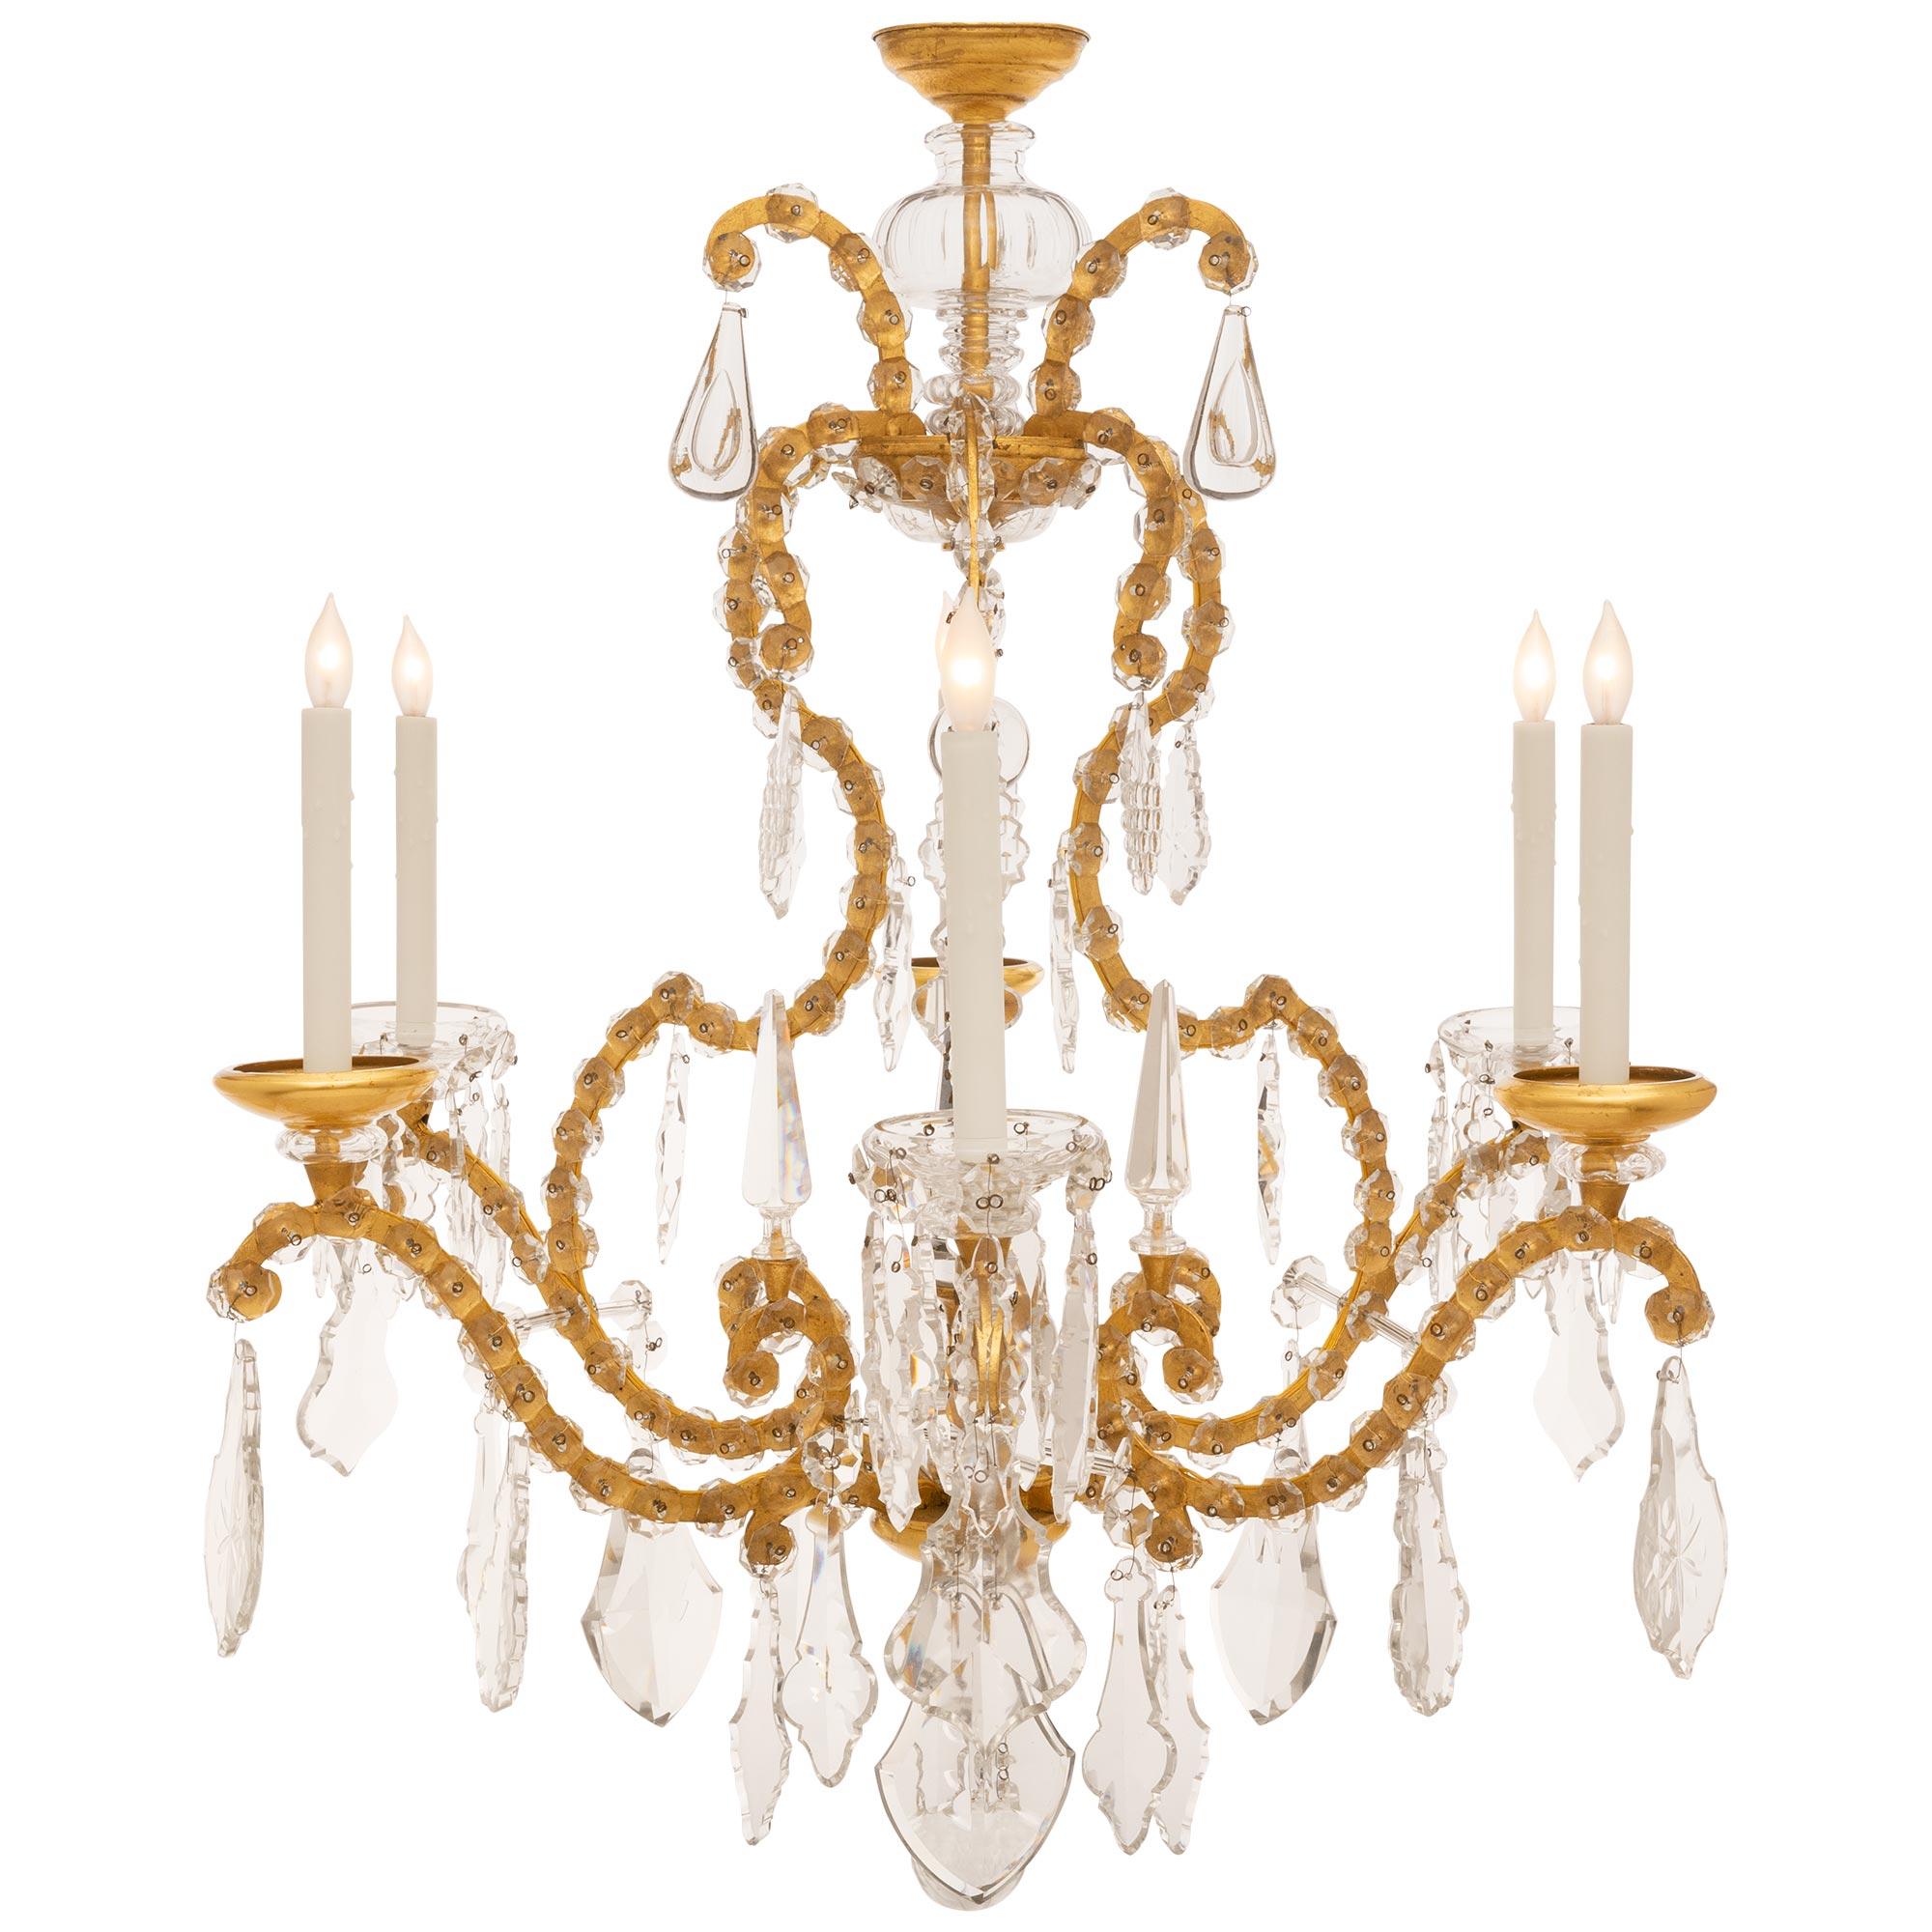 Italian 19th Century Ormolu, Crystal And Gilt Crystal Chandelier In Good Condition For Sale In West Palm Beach, FL